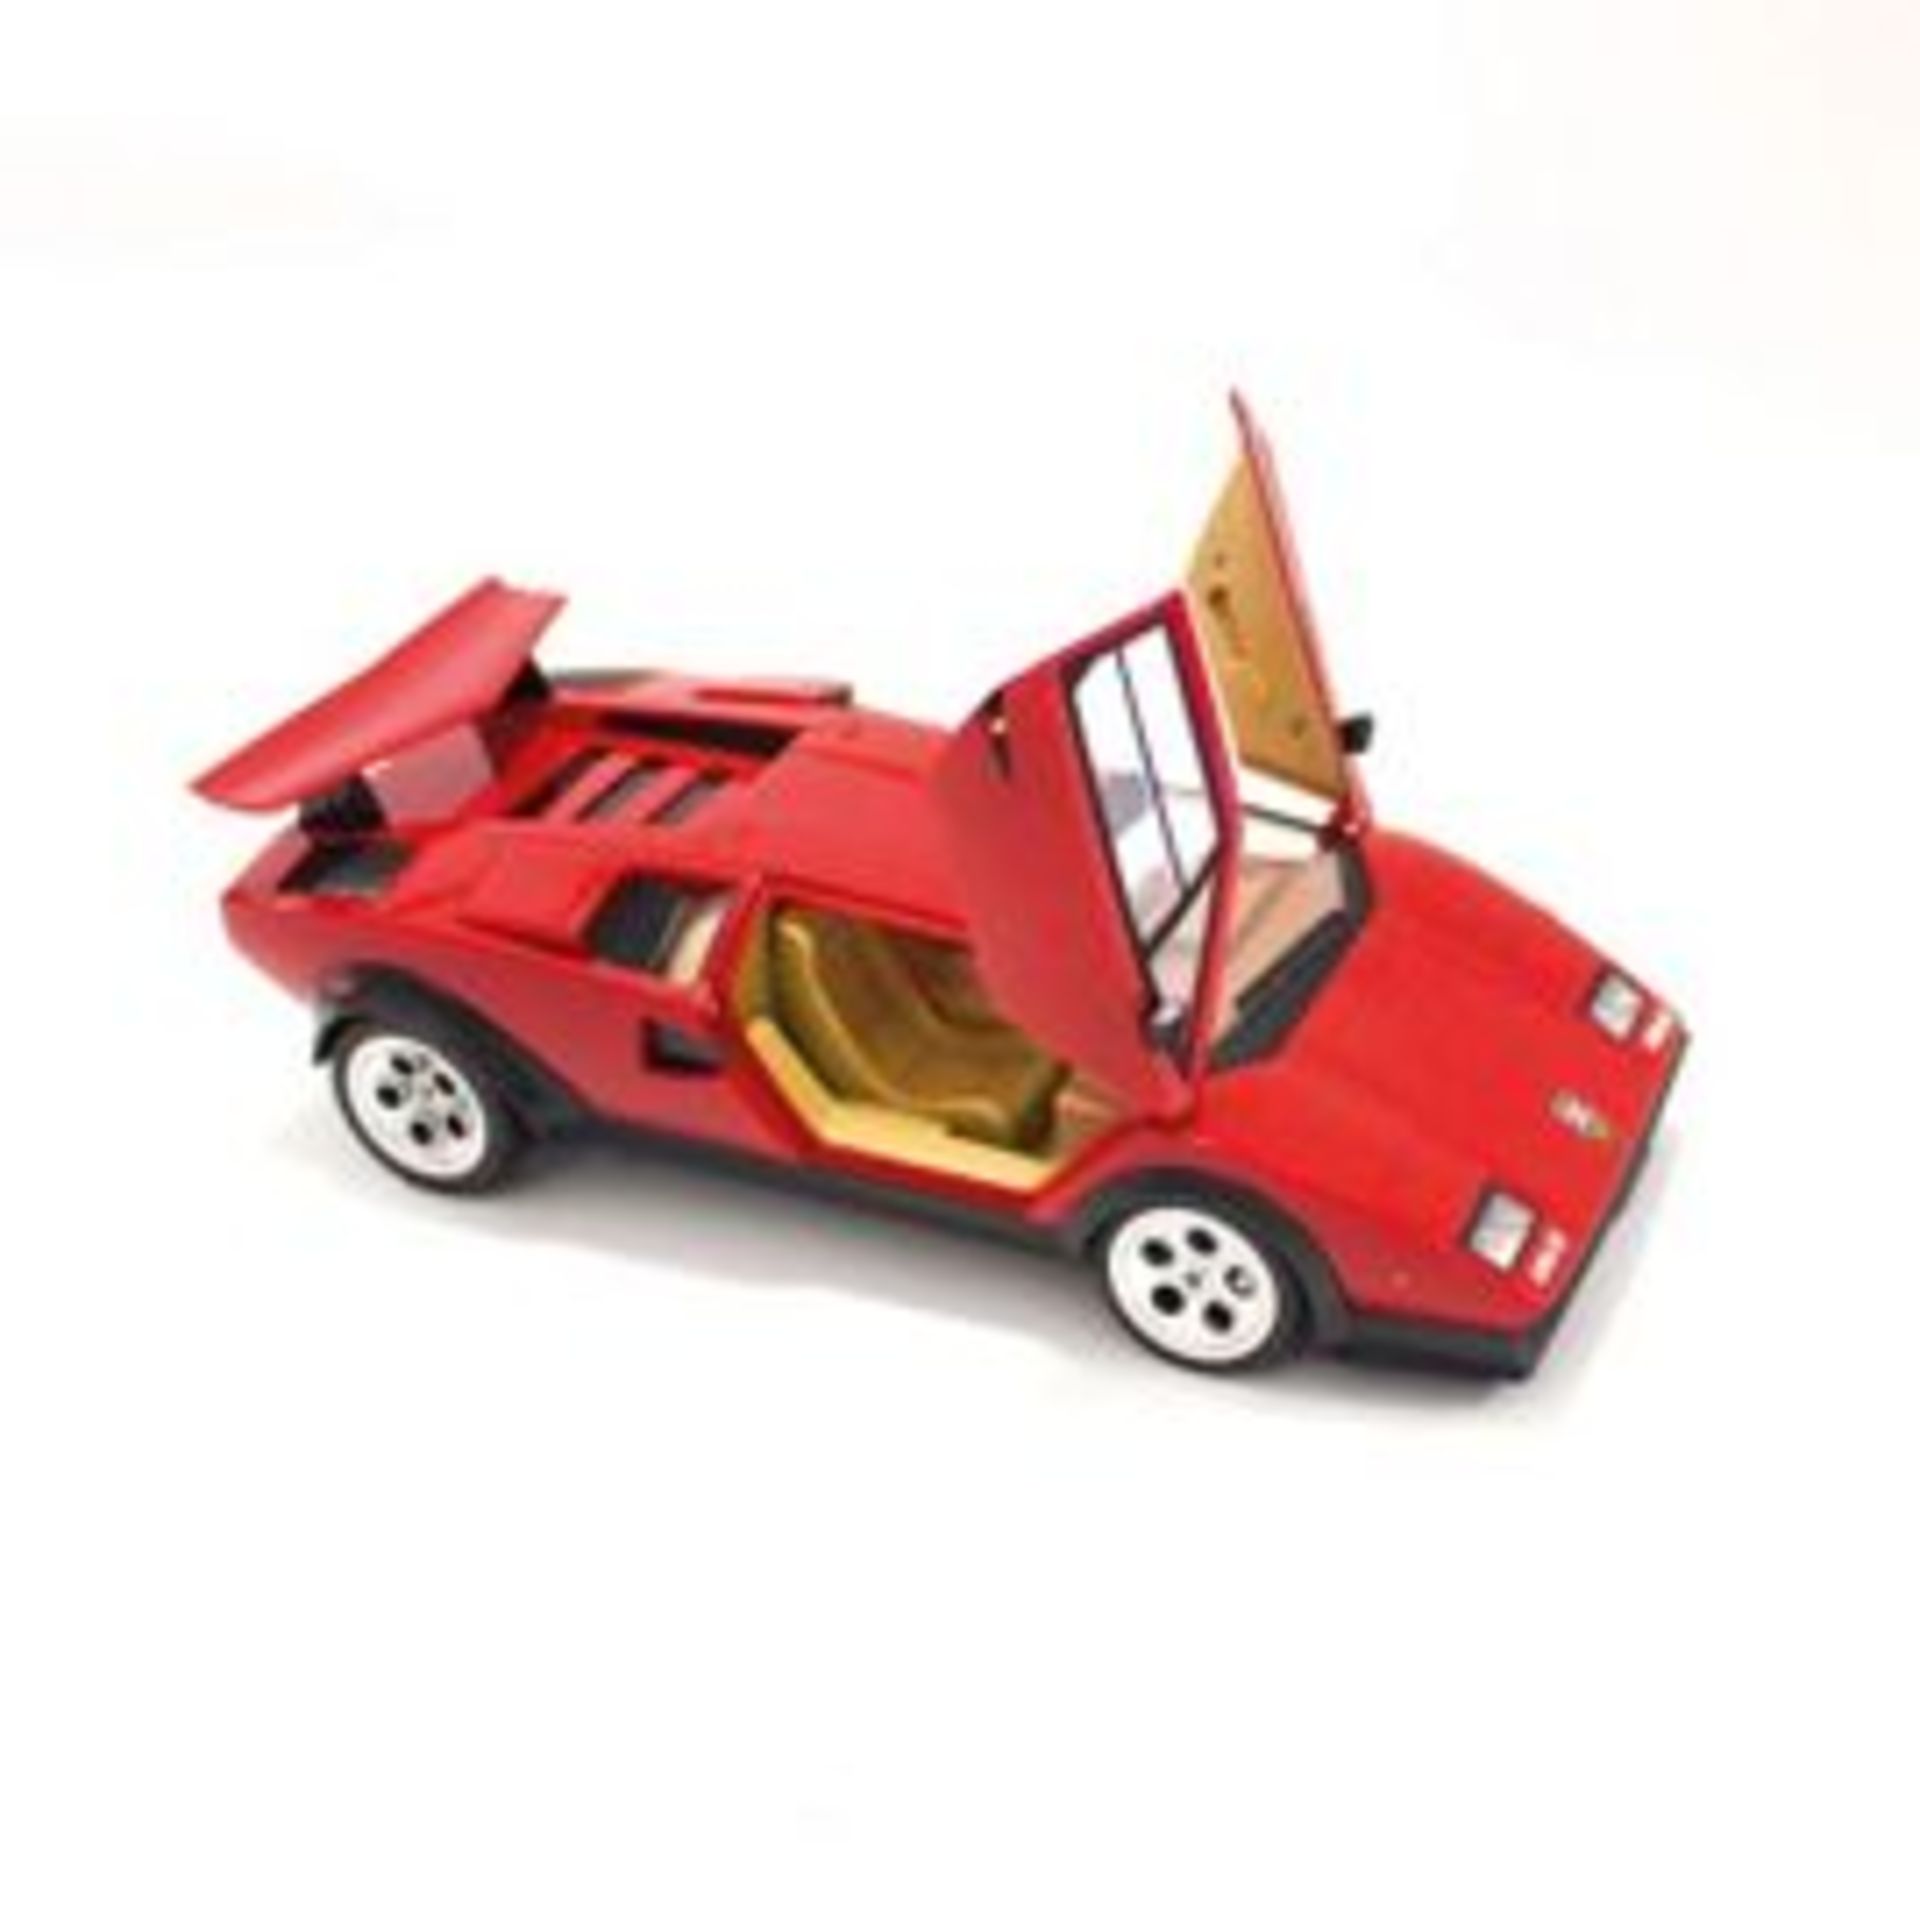 V Brand New Radio Control 1:14 Scale Lamborghini Wolf Countach LP500S Officially Licensed ISP £24.95 - Image 2 of 2